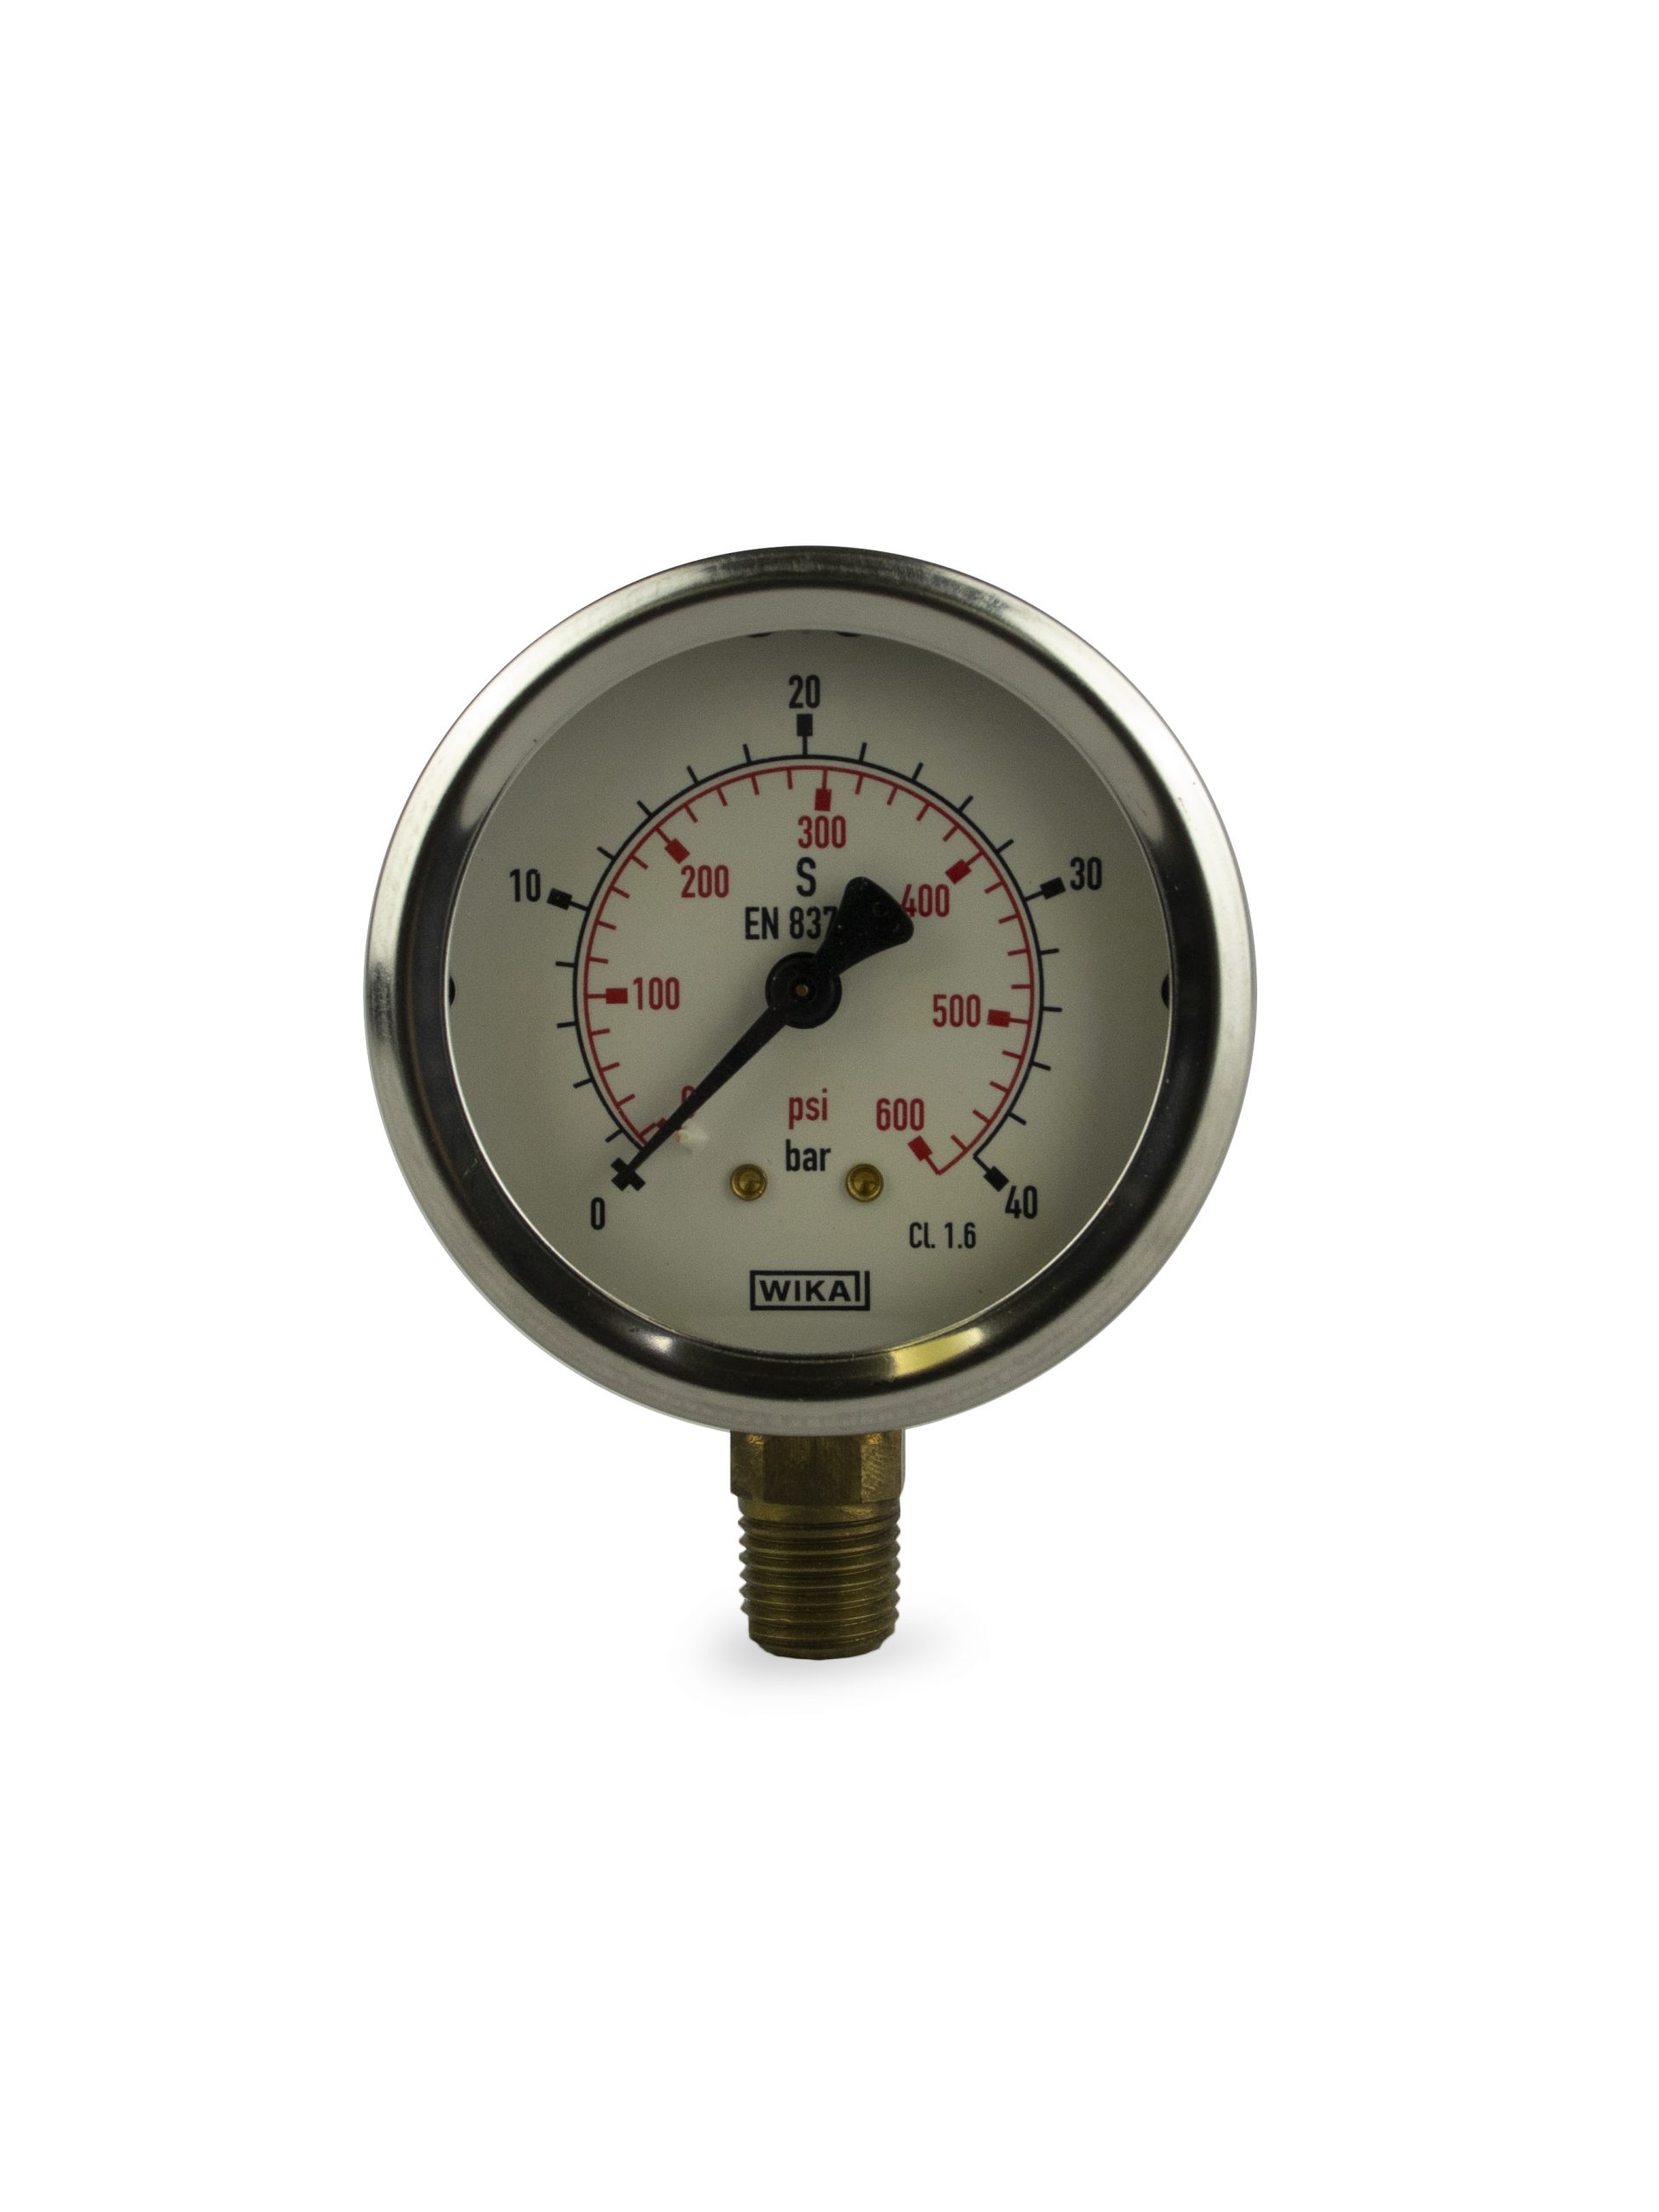 PRESSURE GAUGE 0-40 BAR DIAMETER 2 1/2 Inches CONNECTION 1/4 Inches , WIKA